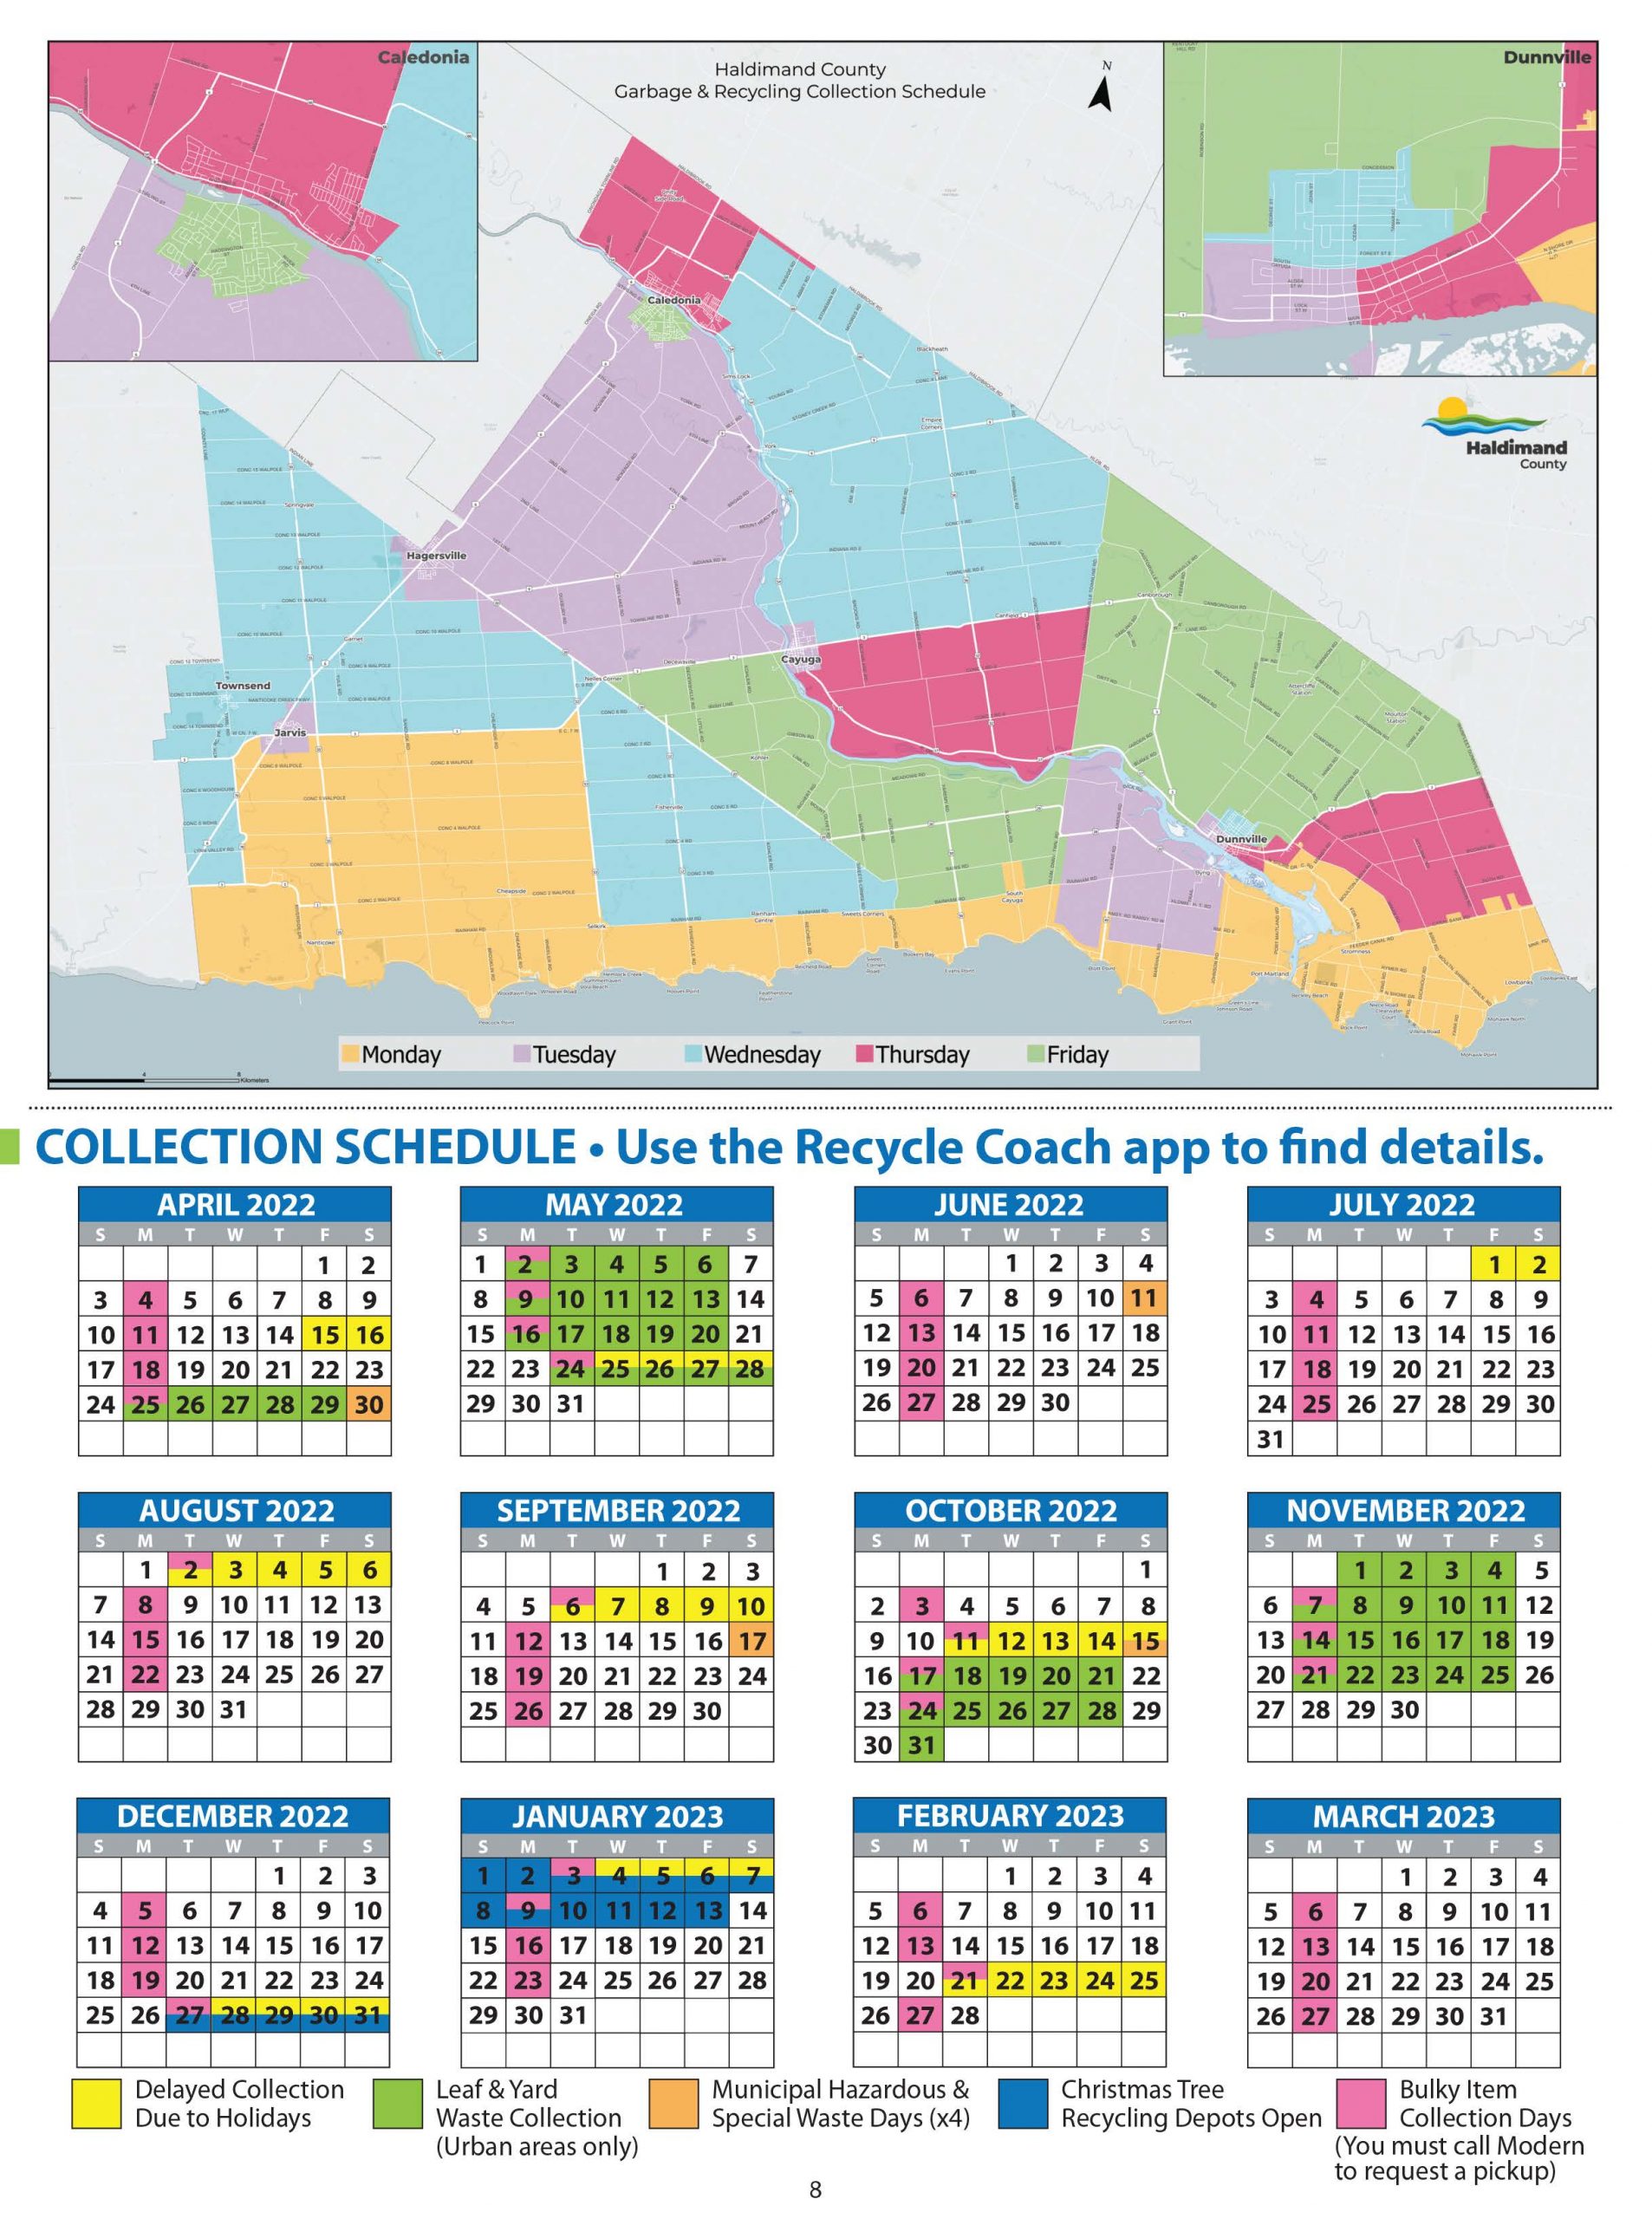 Garbage & Recycling Collection Map-Schedule 2022